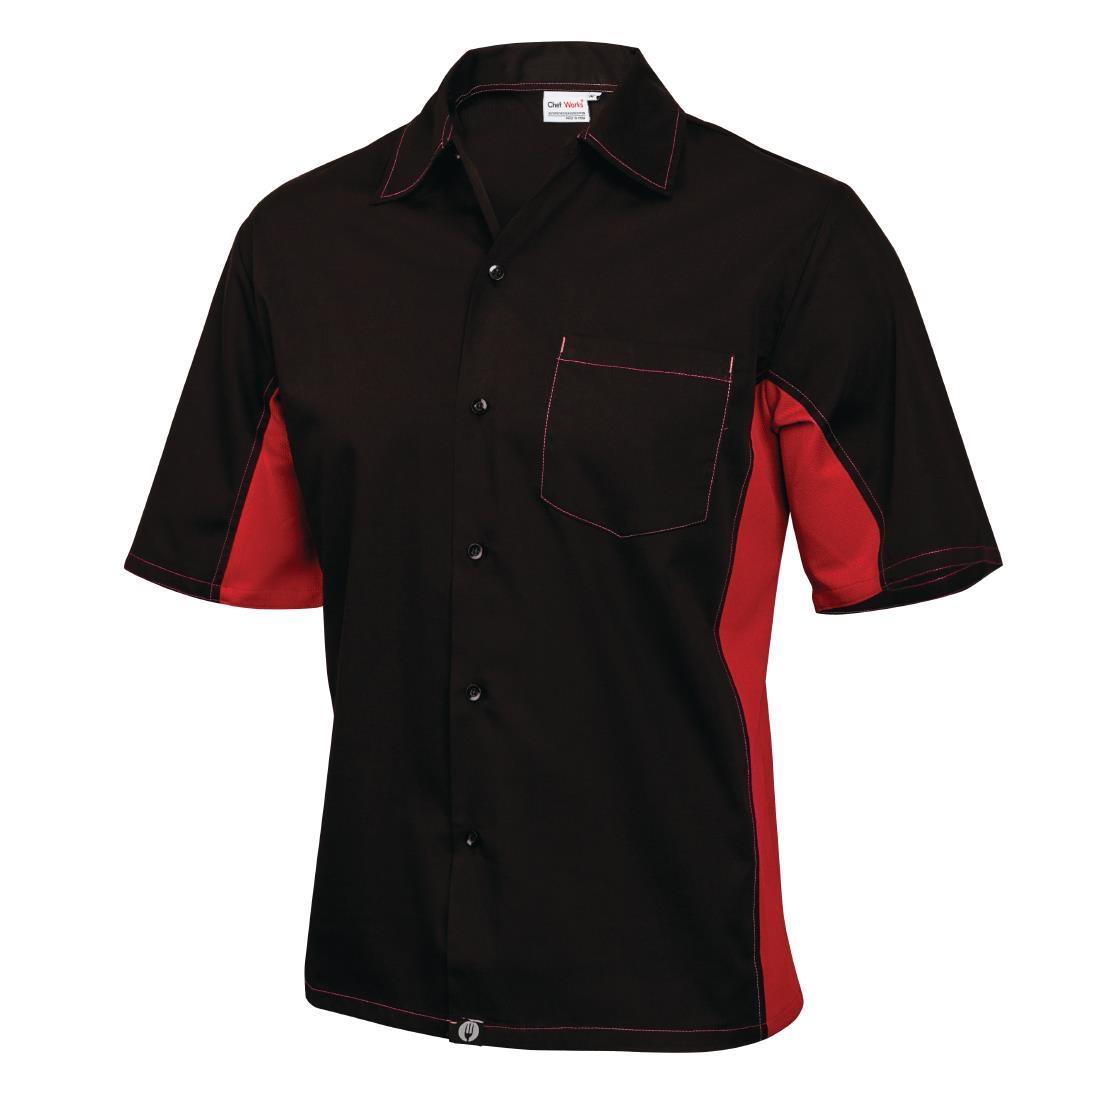 Chef Works Unisex Contrast Shirt Black and Red 2XL - A952-XXL  - 2